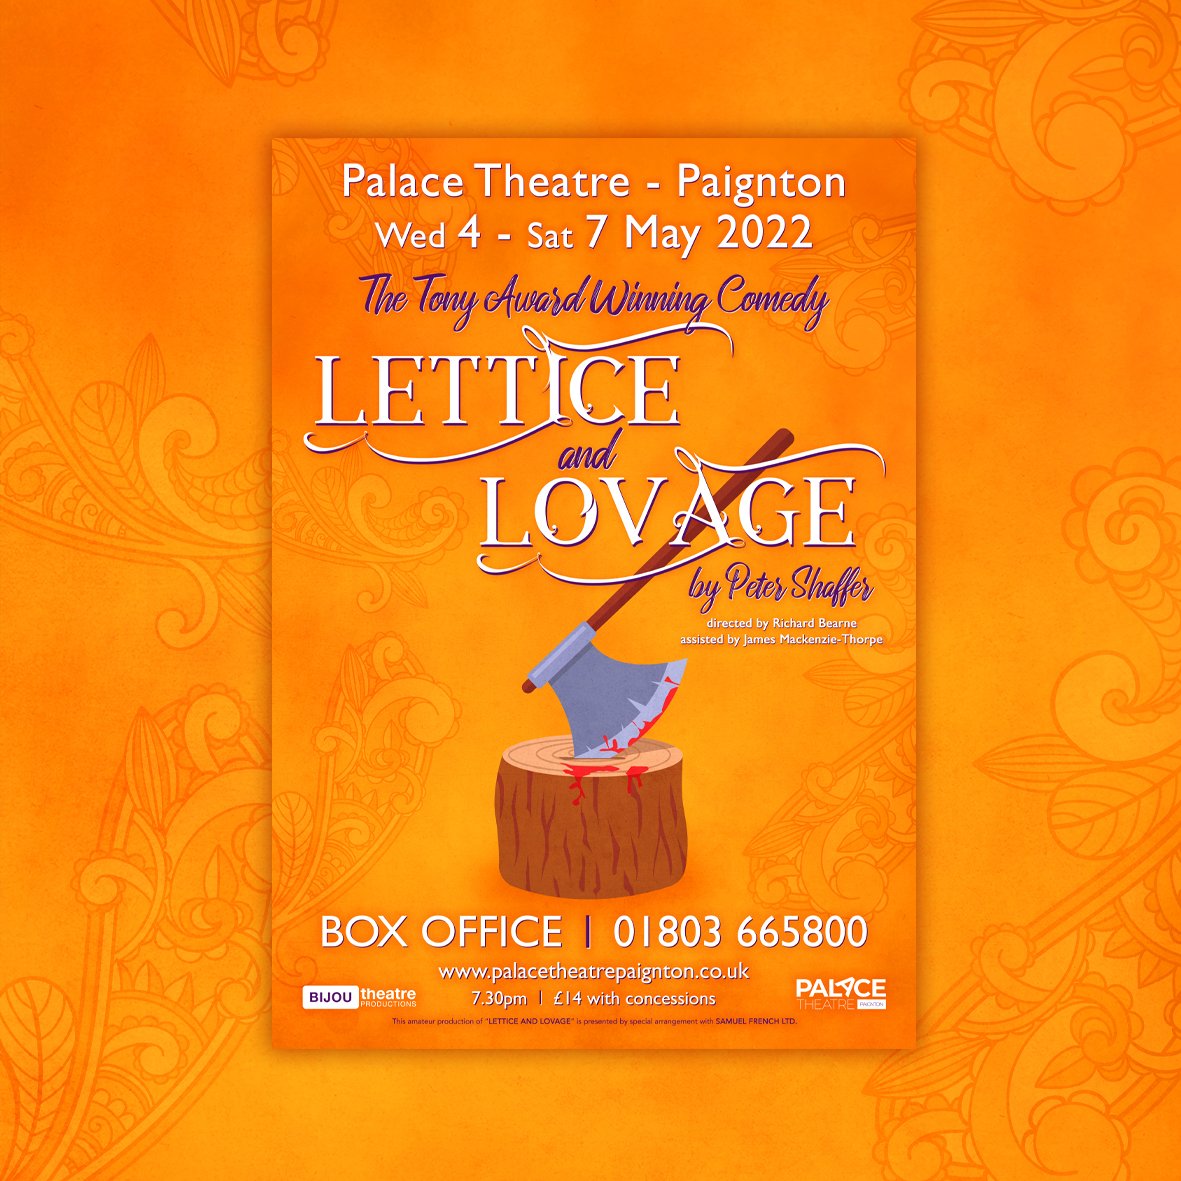 Lettice Love Age | Eye-catching Posters and Merchandise Designed by Hot Rock Group